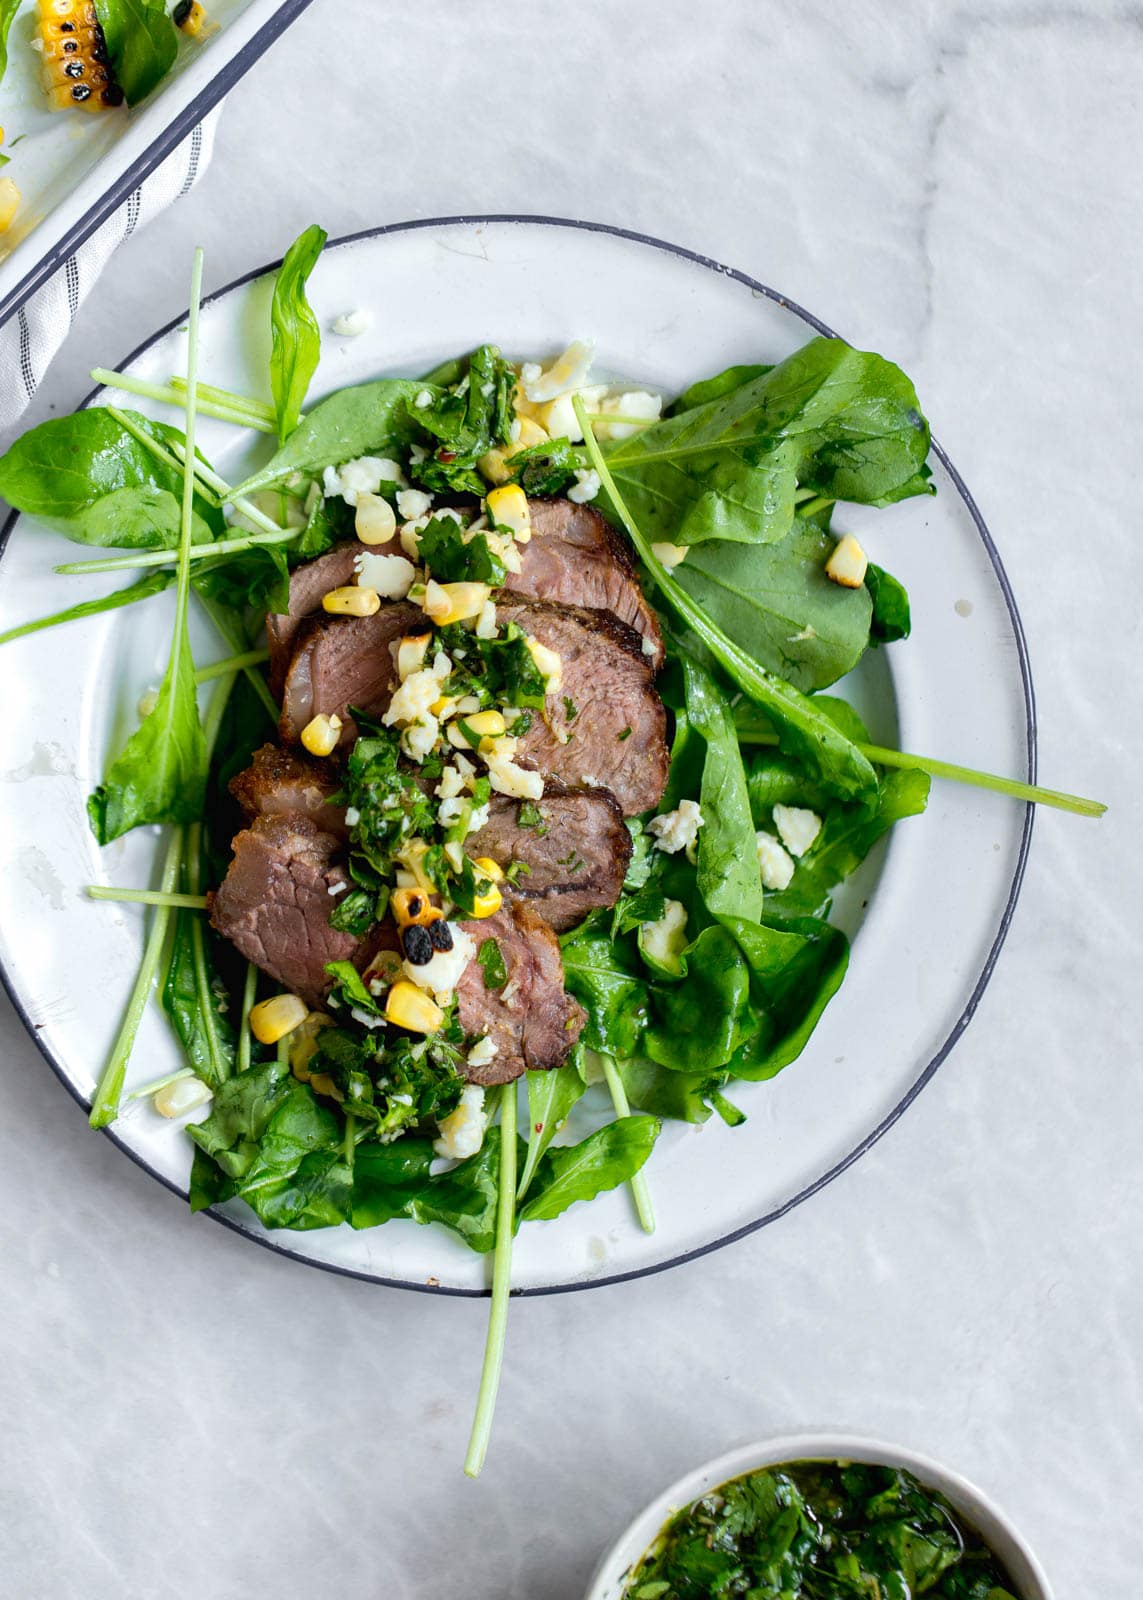 An epic Chimichurri Steak Salad with charred corn, cotija cheese, arugula, and a homemade chimichurri sauce. Perfect for summer nights!